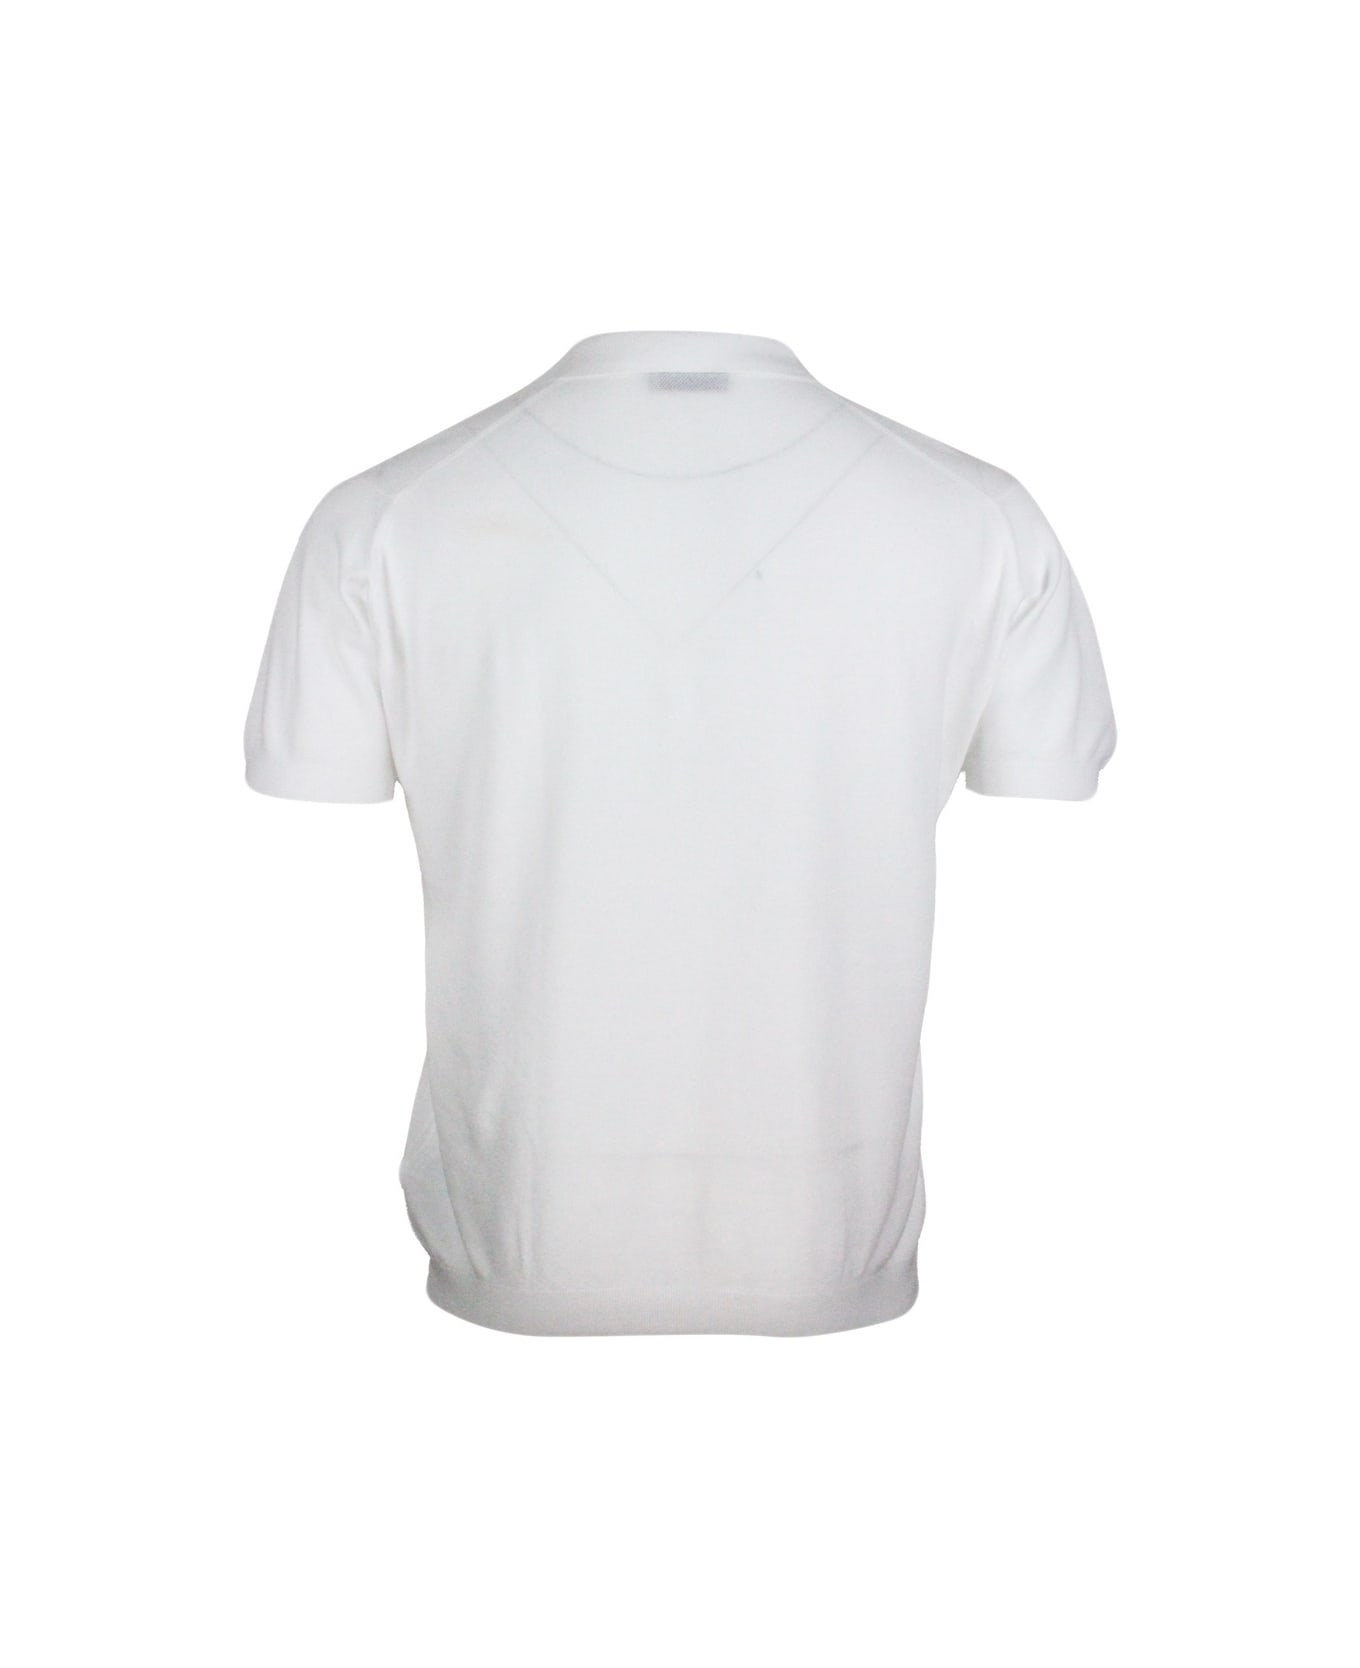 John Smedley Short-sleeved Polo Shirt In Extrafine Piqué Cotton Thread With Three Buttons - White ポロシャツ